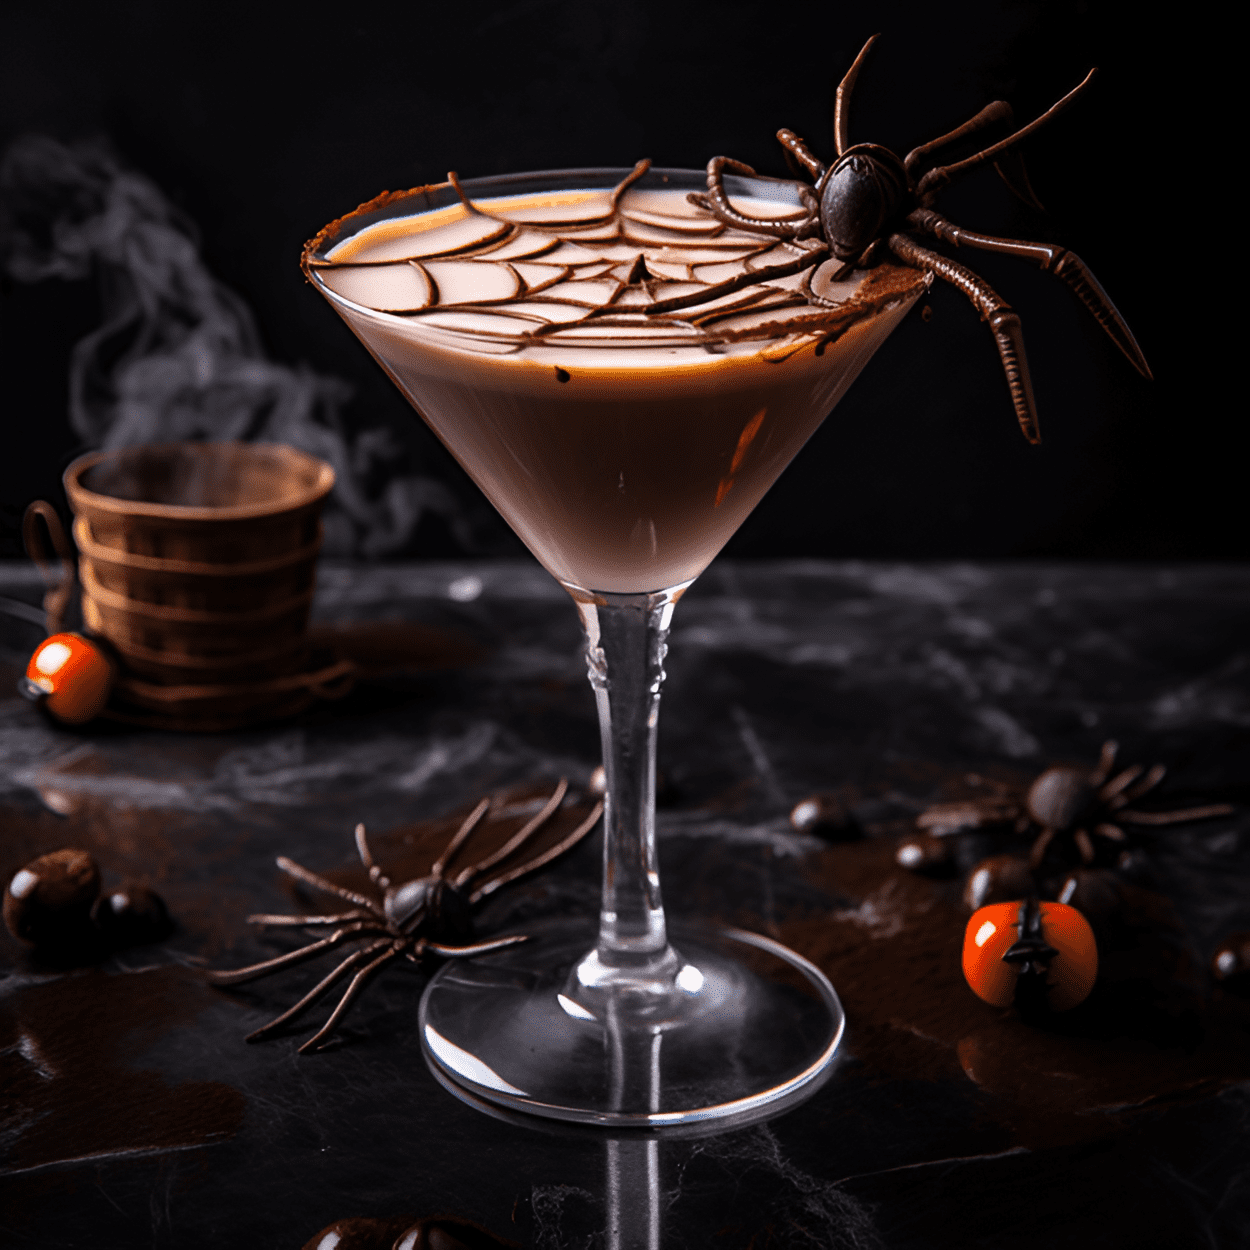 Spider Bite Martini Cocktail Recipe - The Spider Bite Martini is a sweet and creamy cocktail. The vodka provides a strong base, while the creme de cacao adds a rich chocolate flavor. The cream smooths out the cocktail, giving it a velvety texture that's easy on the palate.